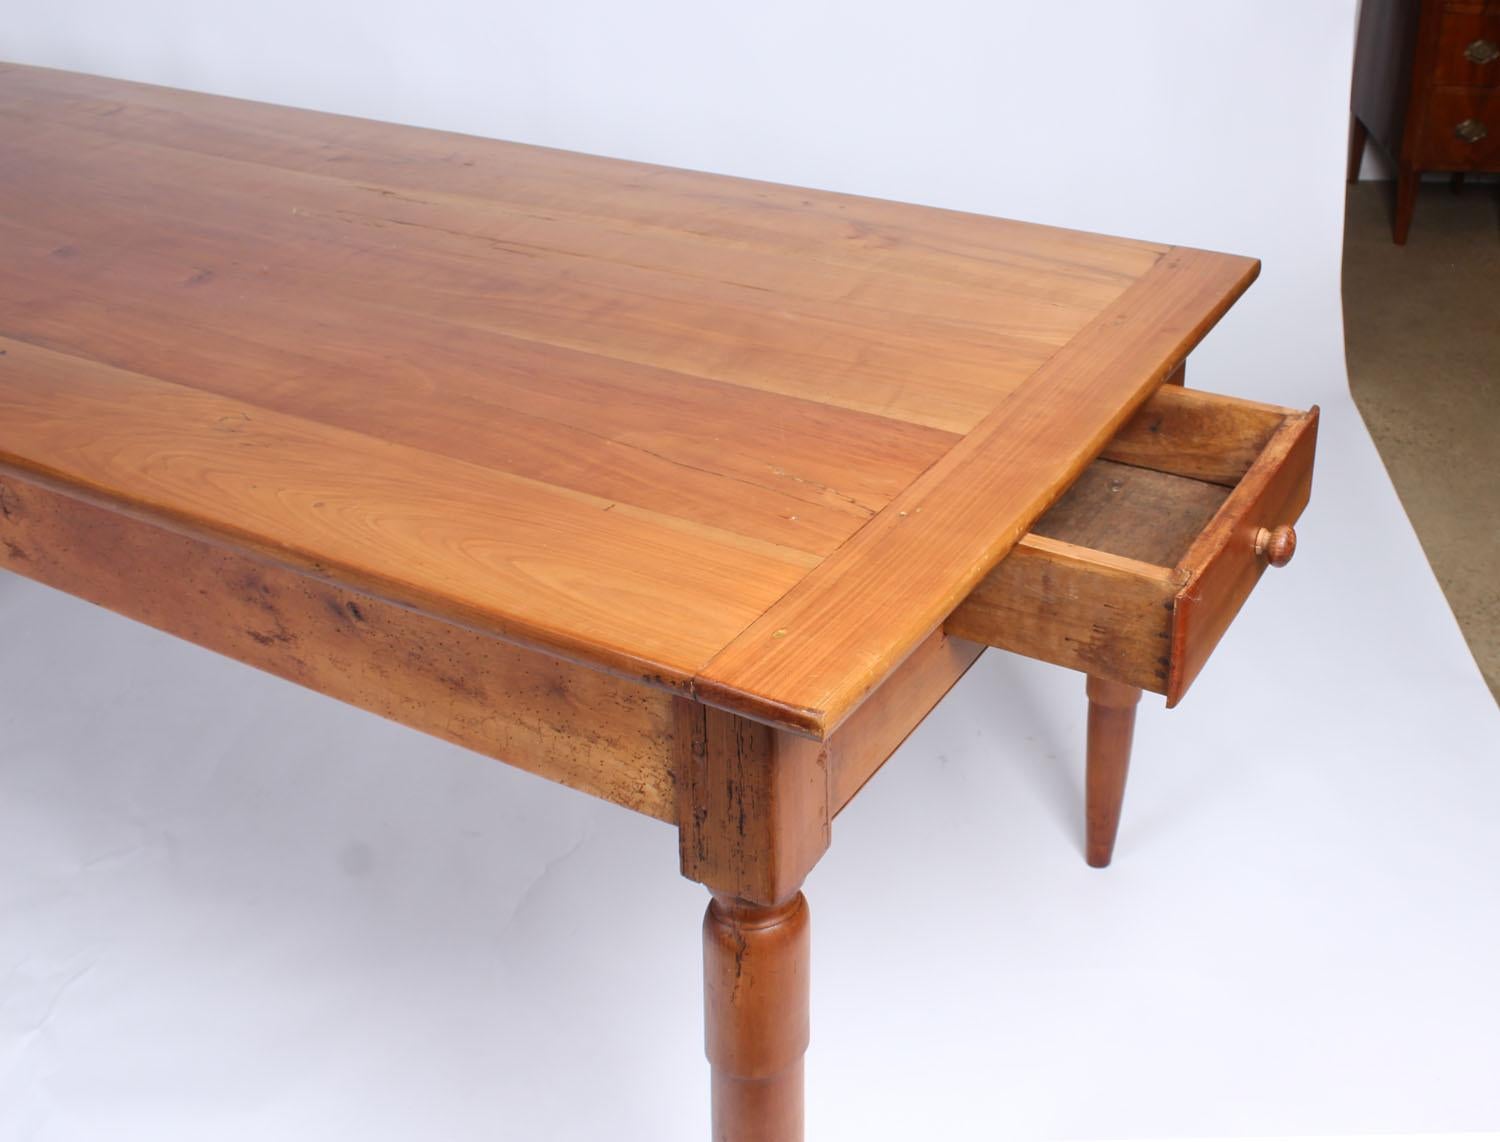 Hand-Crafted 19th Century French Farmhouse Table, Solid Cherry, Extendable for 10 People